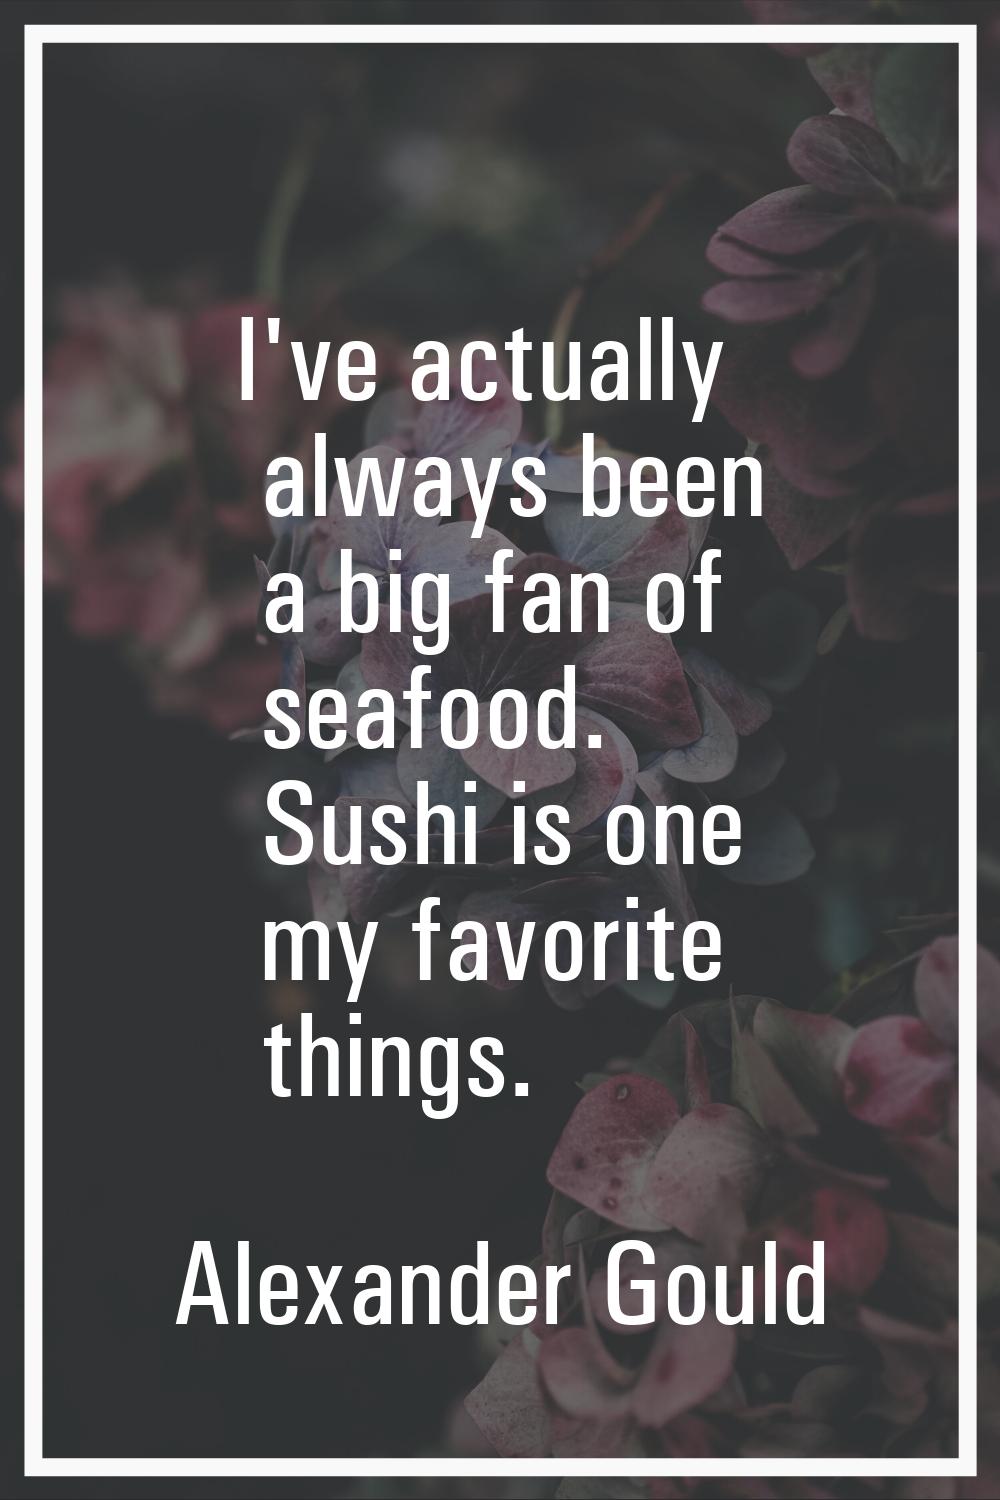 I've actually always been a big fan of seafood. Sushi is one my favorite things.